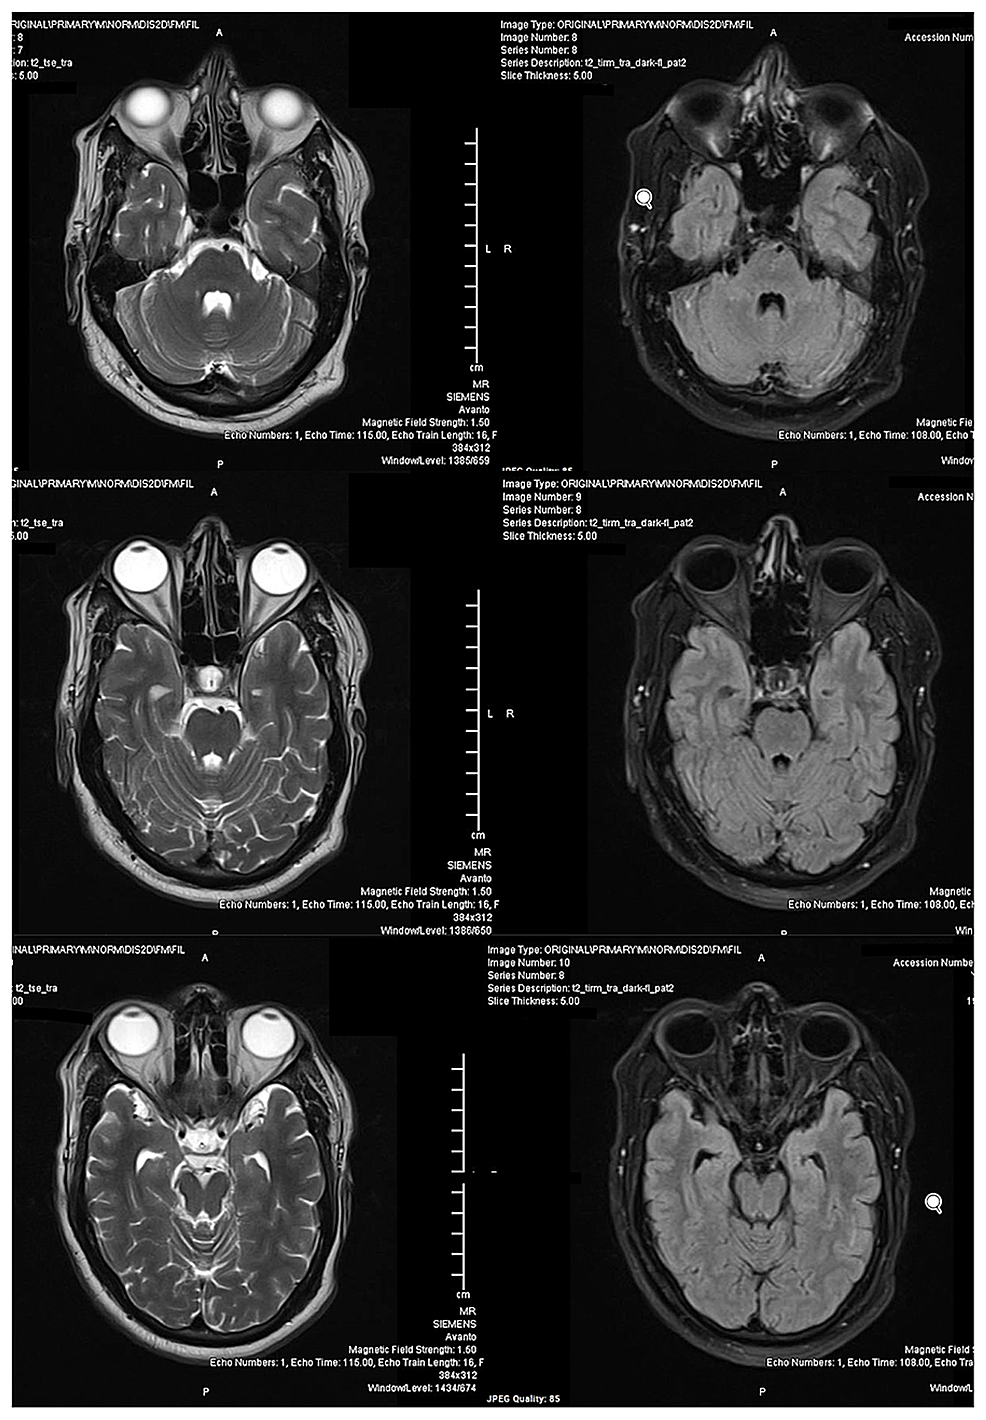 MRI-brain-of-the-patient-with-T2-weighted-images-(left)-and-FLAIR-images-(right)-at-the-level-of-the-pons-showing-no-abnormality.